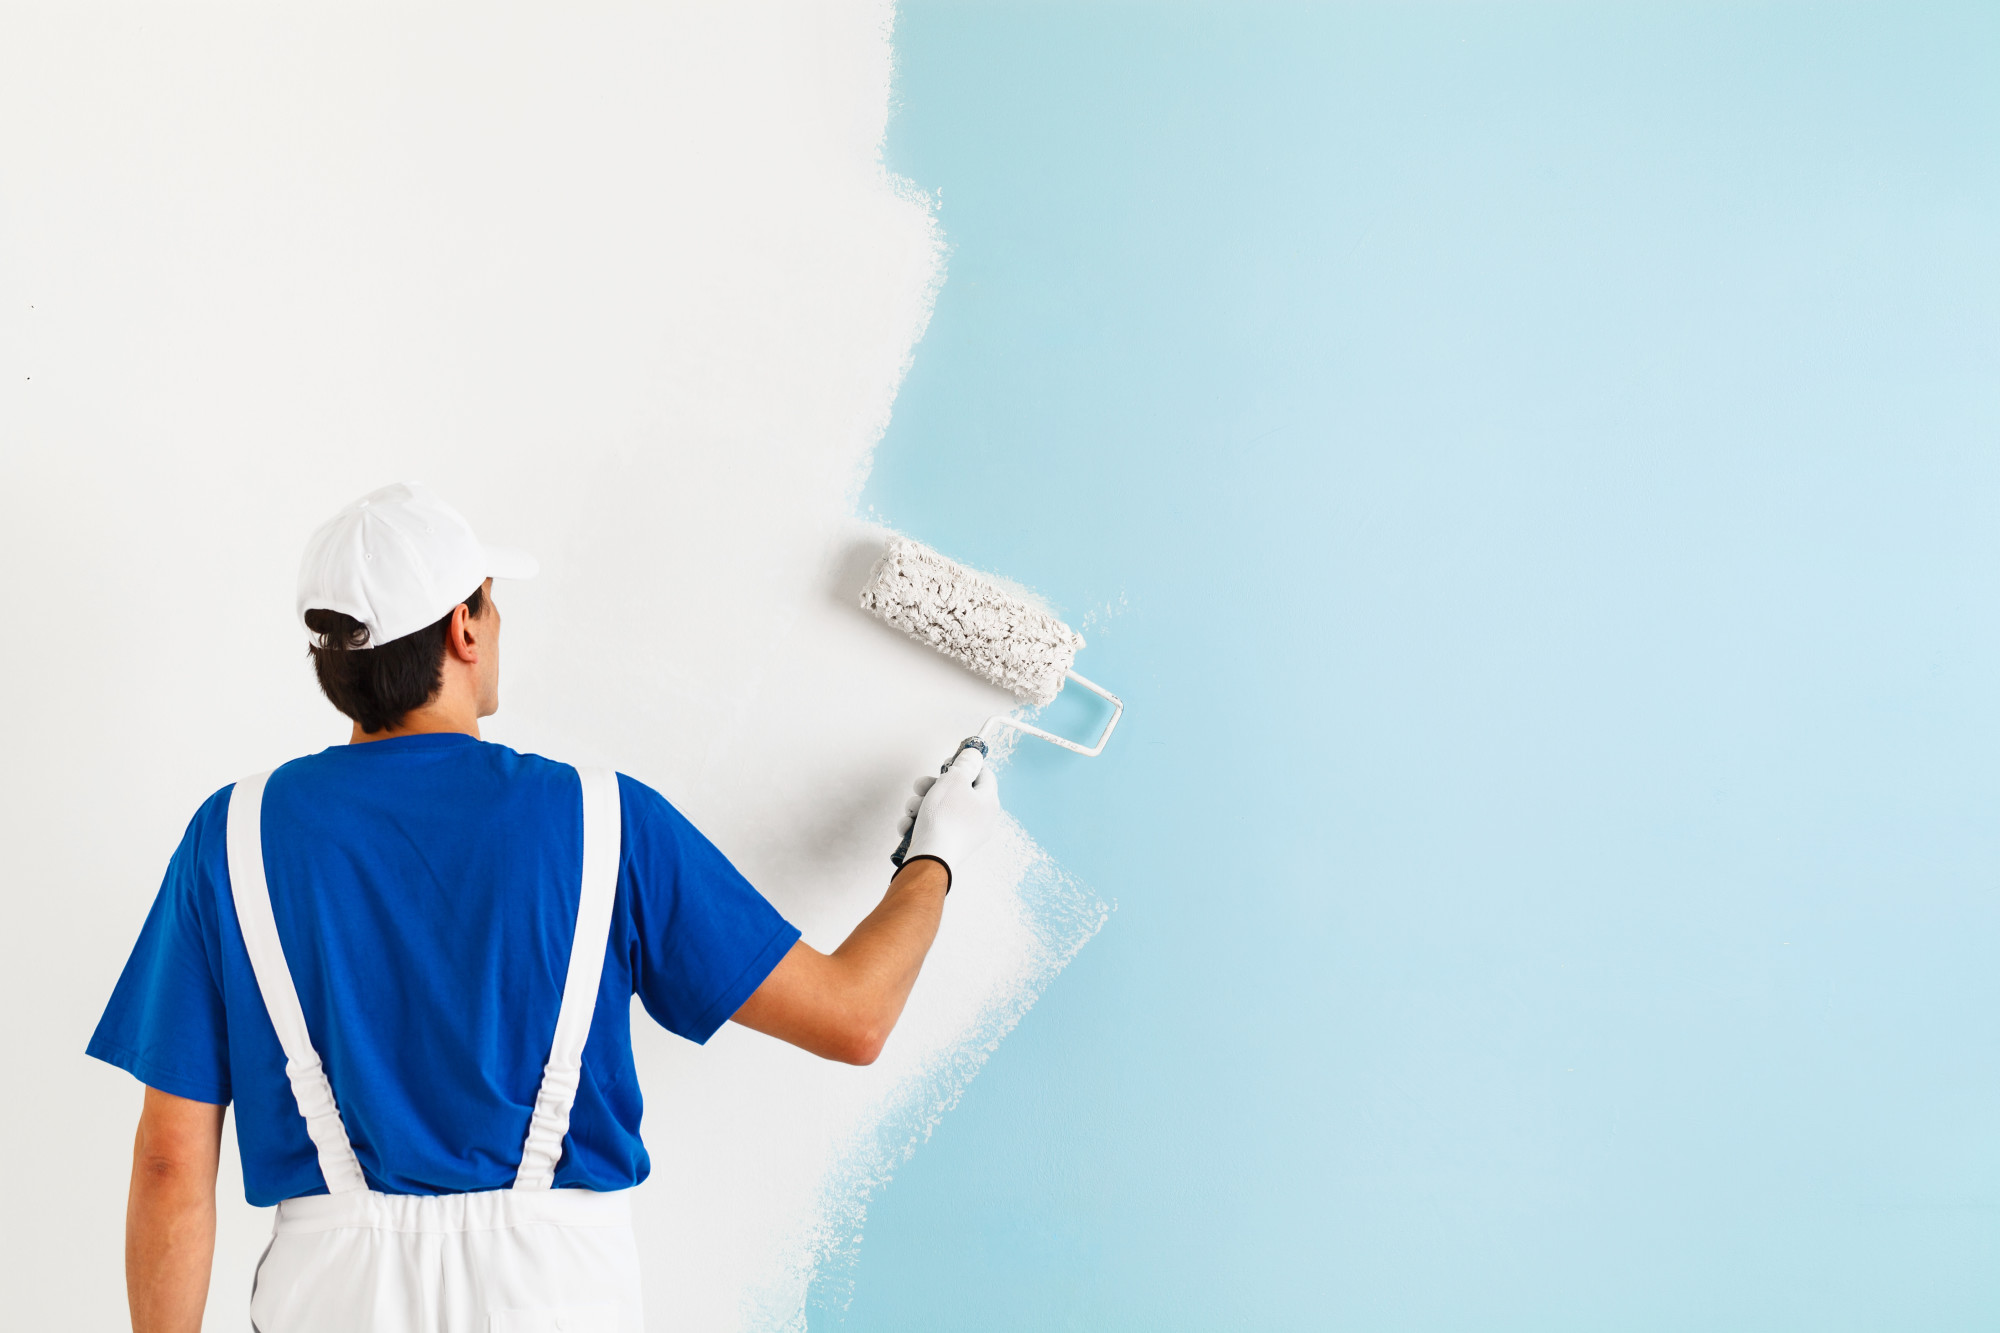 Interior house painting near me: Do you want to know how to choose the right house painter? Read on to learn how to make the right choice.